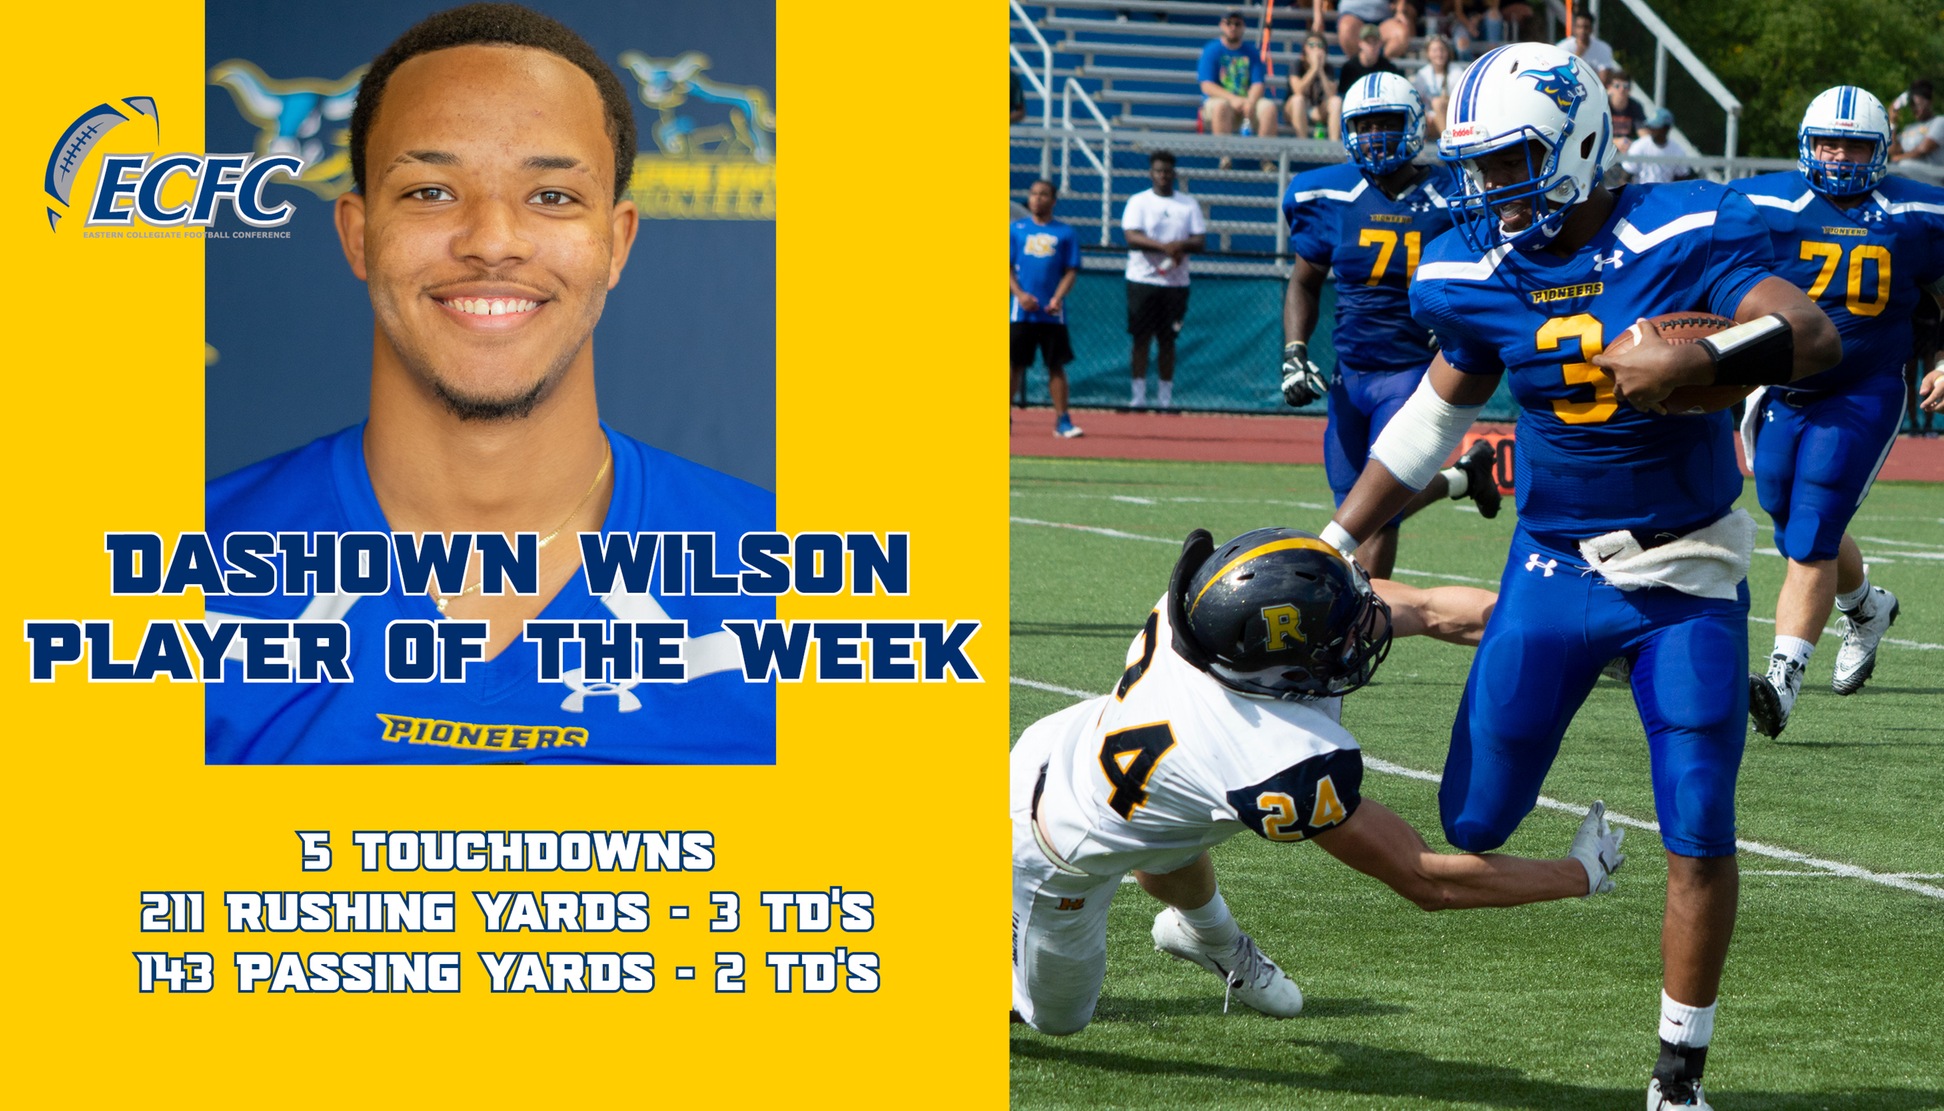 Dashown Wilson named ECFC Offensive Player of the Week